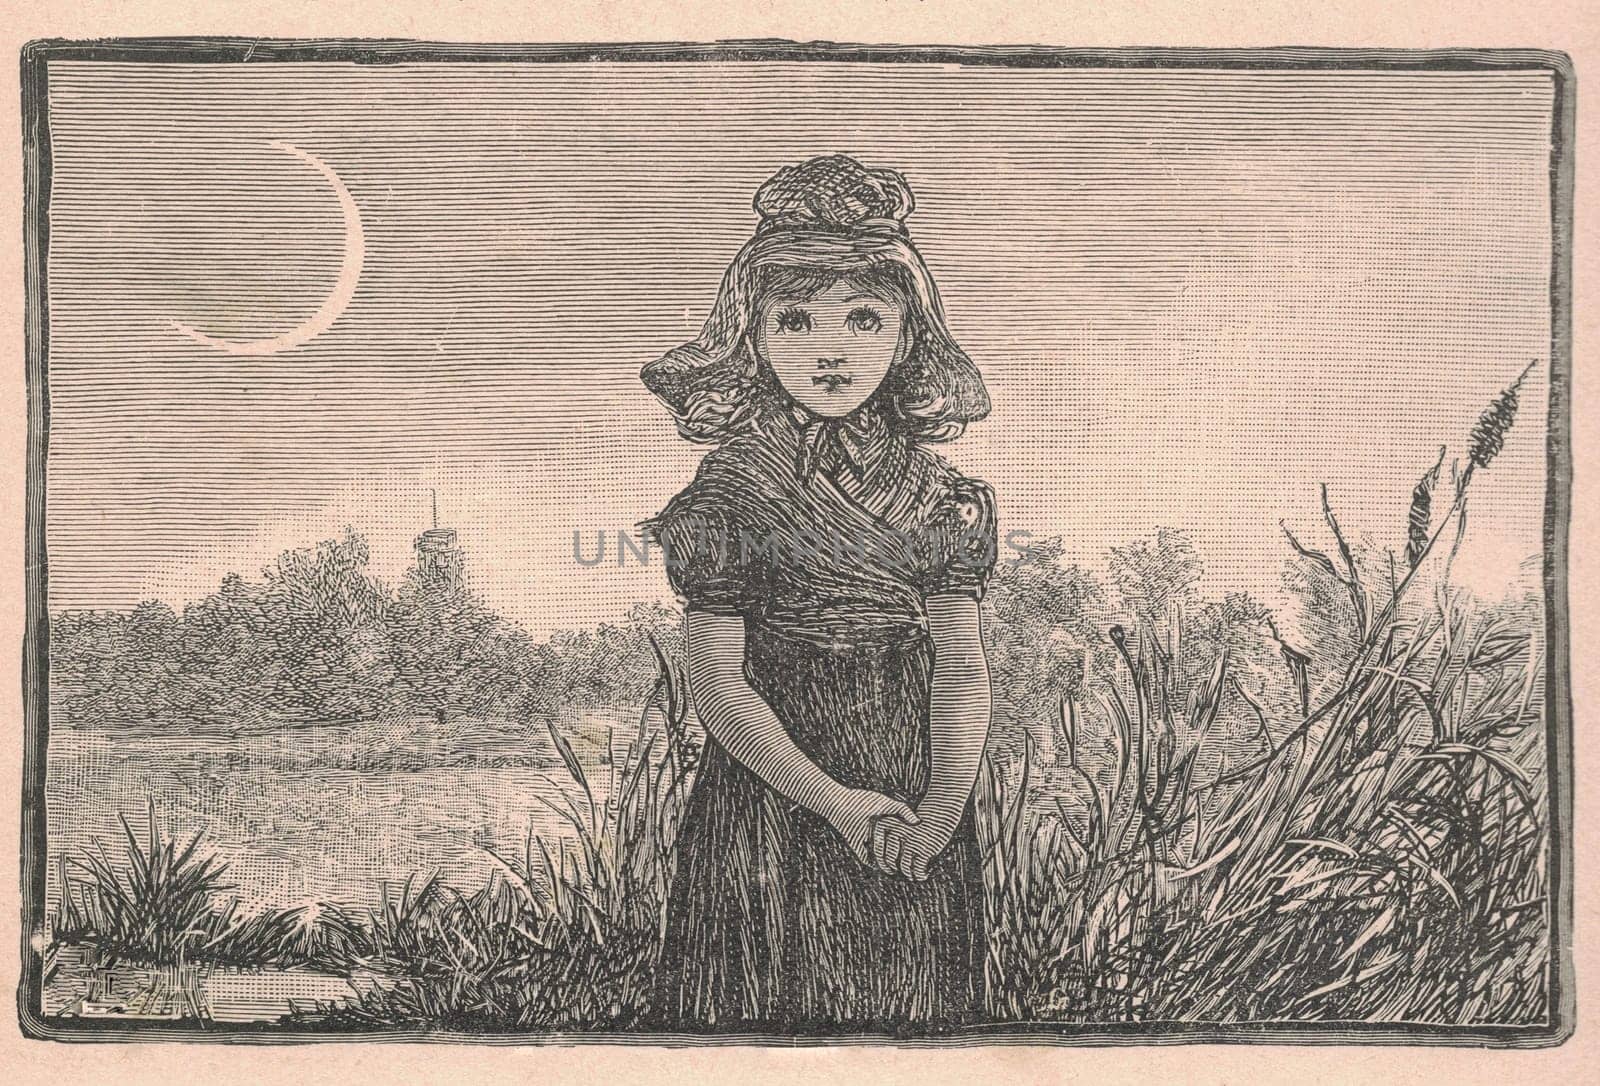 Black and white antique illustration shows a girl at dusk. Vintage drawing shows the girl at twilight. Old picture from fairy tale book. Storybook illustration published 1910. A fairy tale, fairytale, wonder tale, magic tale, fairy story or Marchen is an instance of folklore genre that takes the form of a short story. Such stories typically feature mythical entities such as dwarfs, dragons, elves, fairies and Peris, giants, Divs, gnomes, goblins, griffins, mermaids, talking animals, trolls, unicorns, or witches, and usually magic or enchantments.